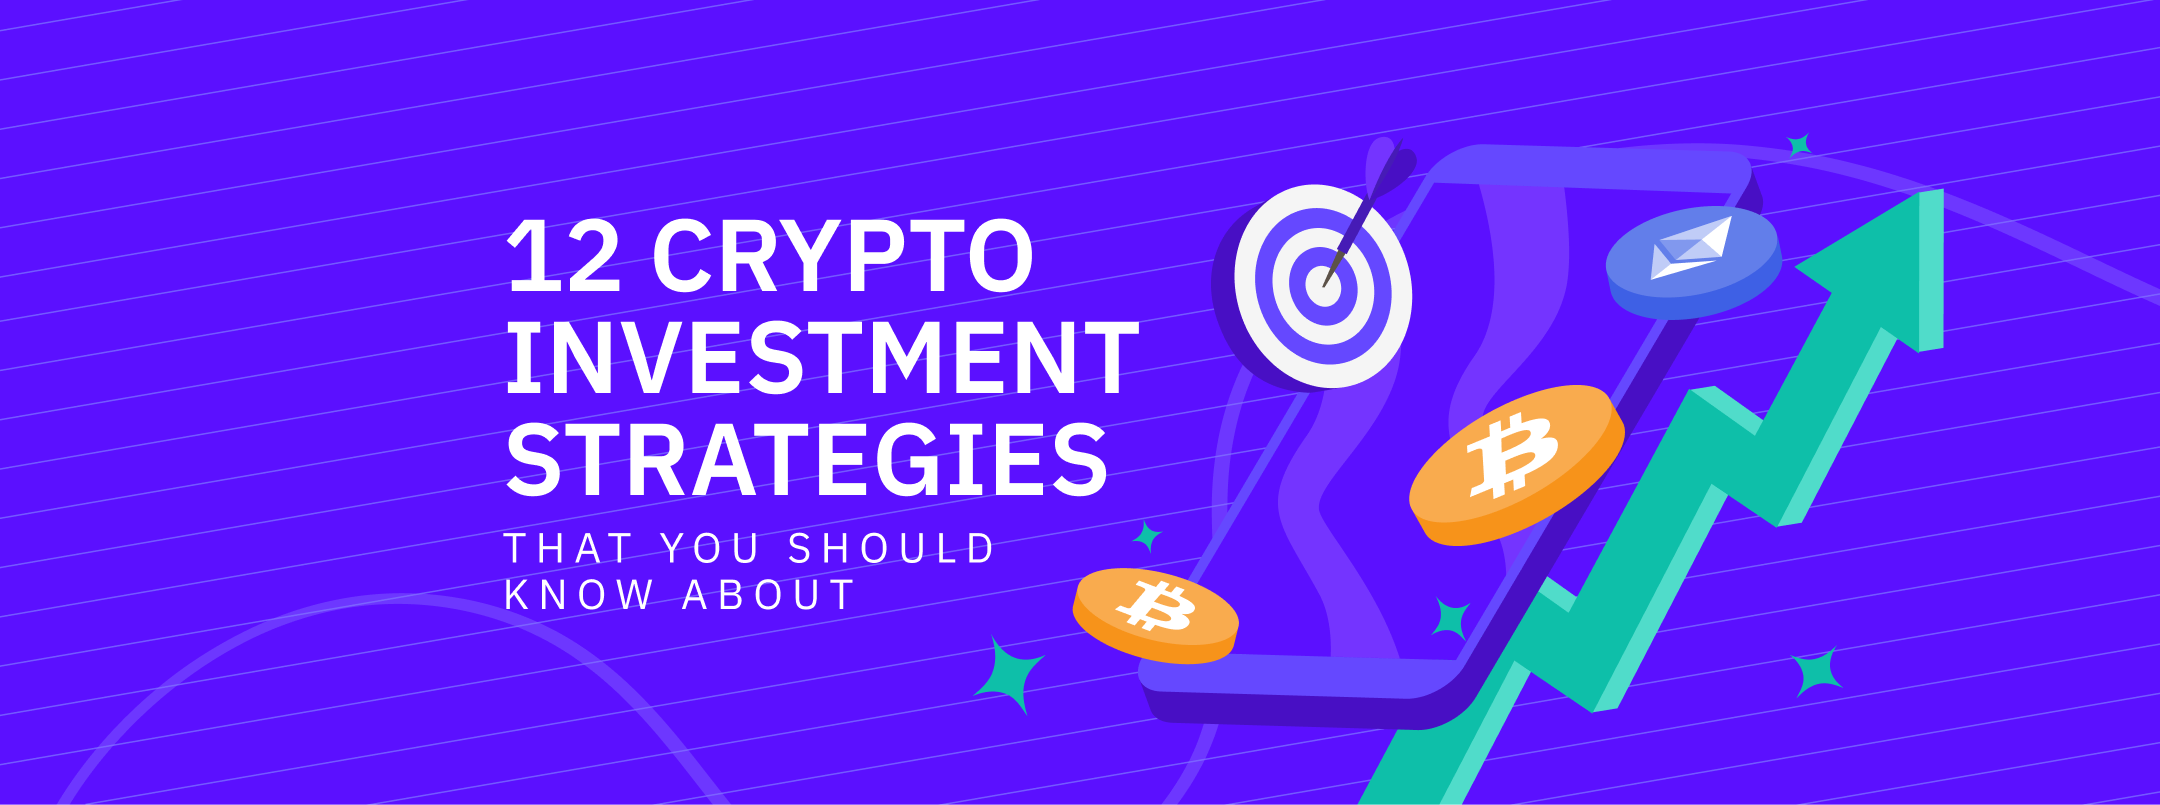 12 Crypto Investment Strategies That You Should Know About